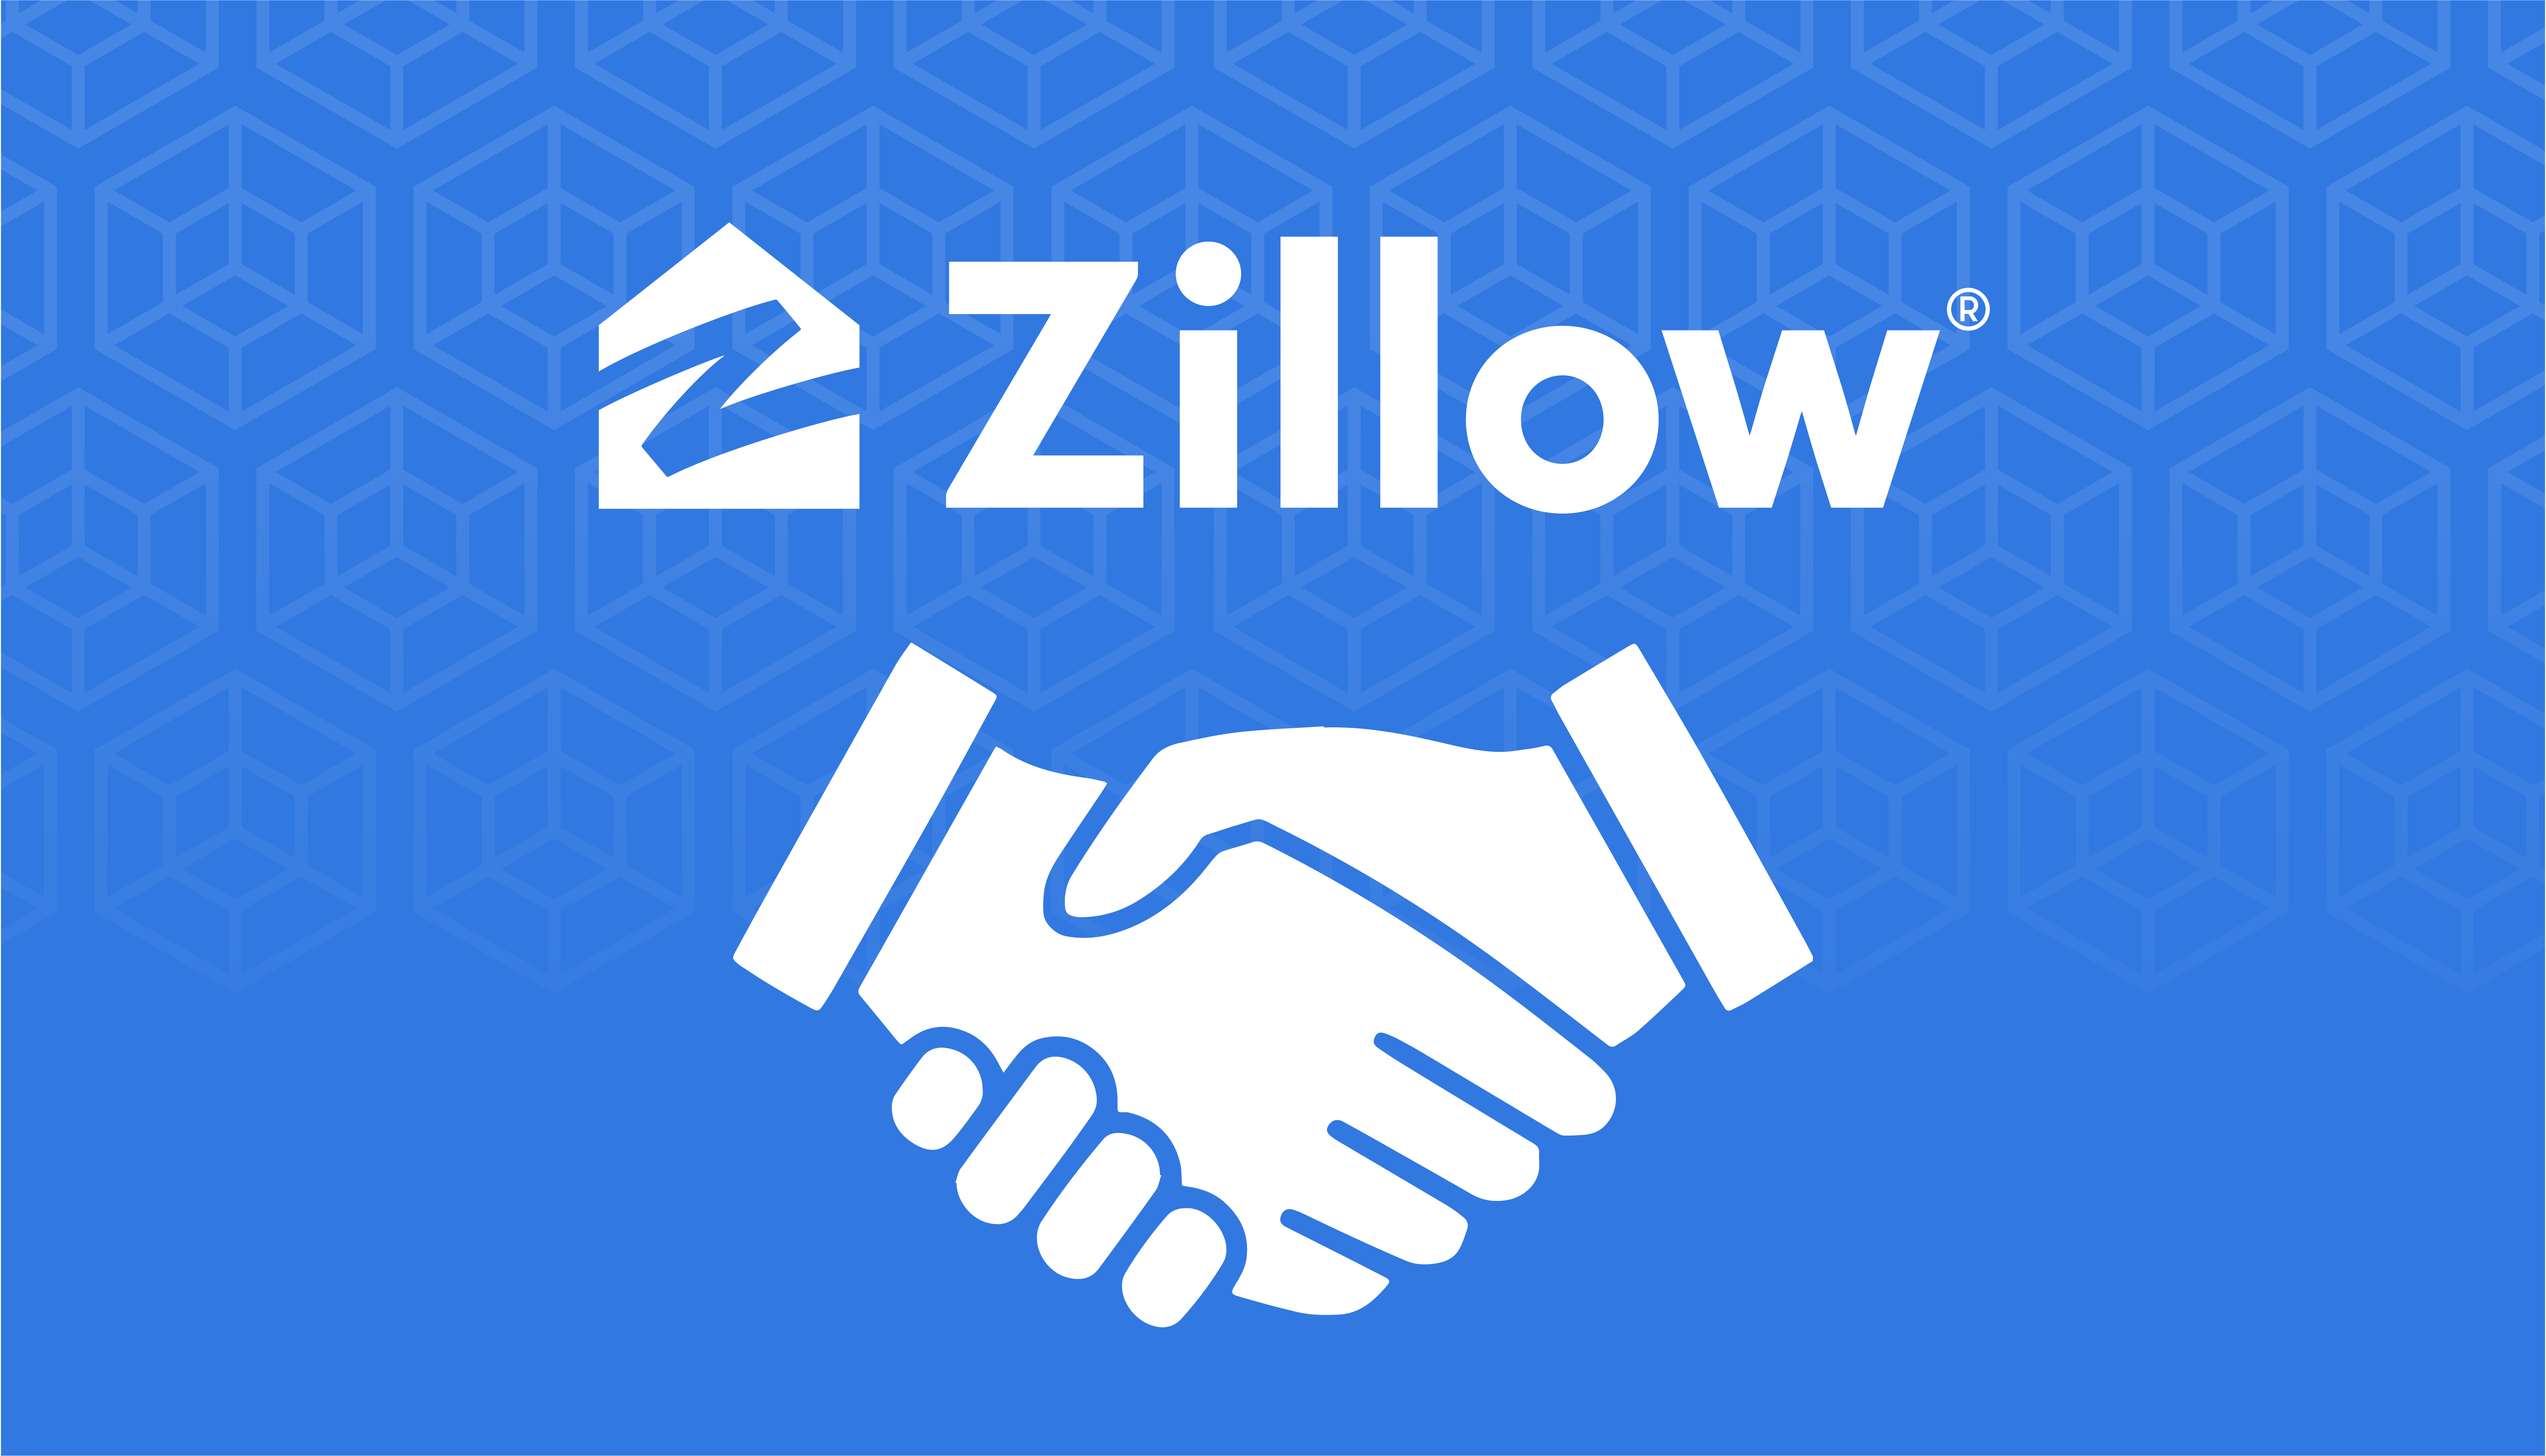 HouseLens Announces Partnership With Zillow - Seek Now